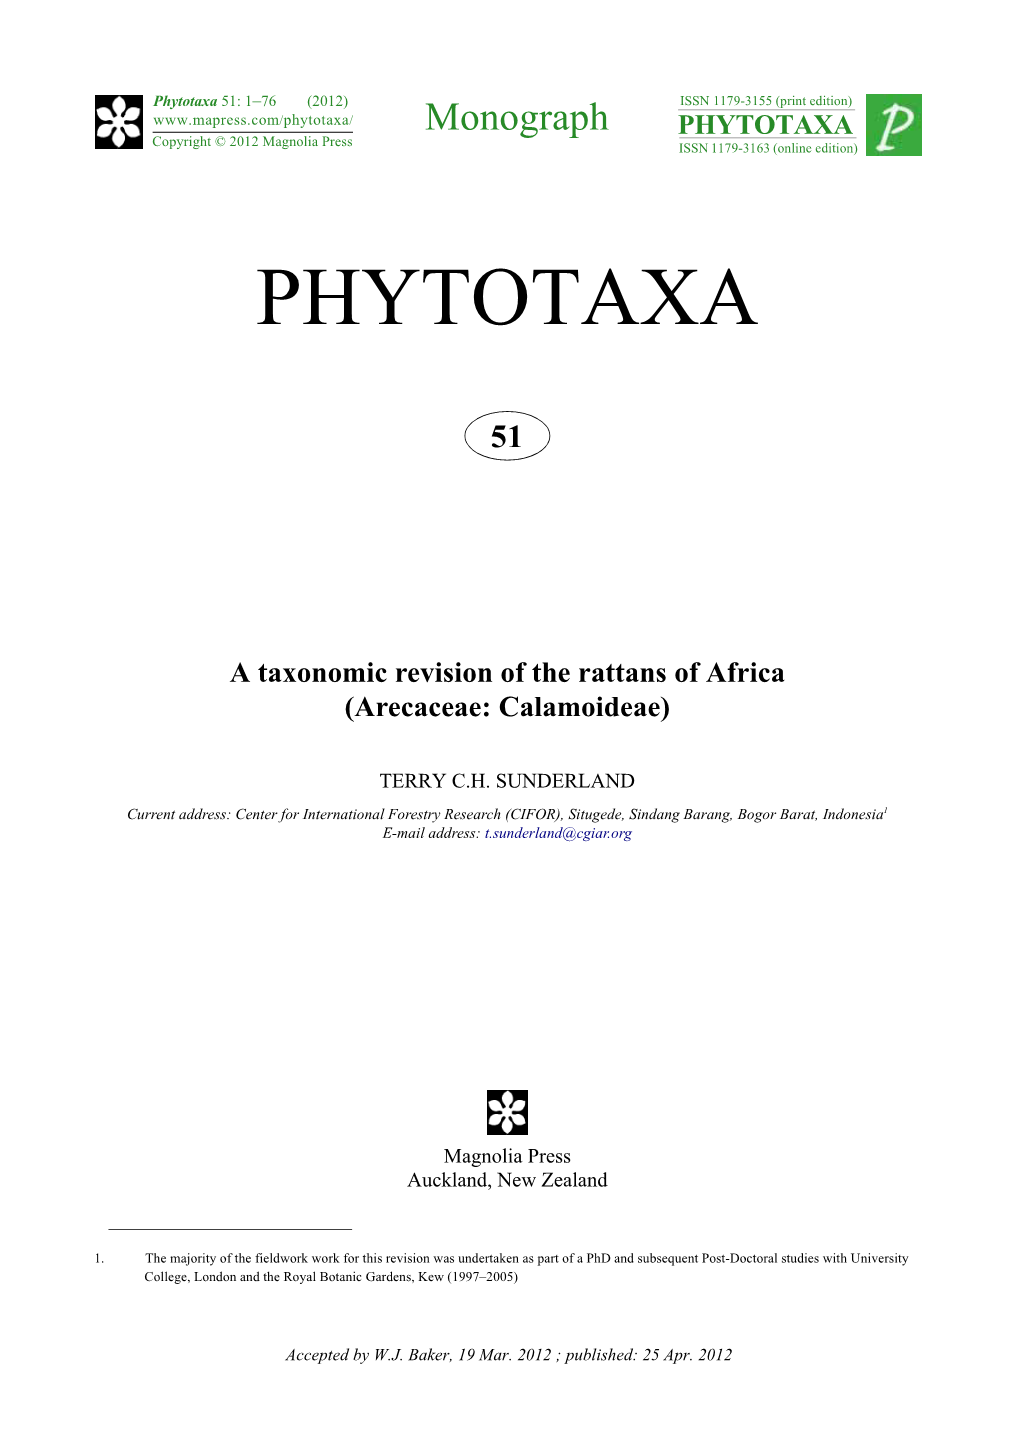 A Taxonomic Revision of the Rattans of Africa (Arecaceae: Calamoideae)